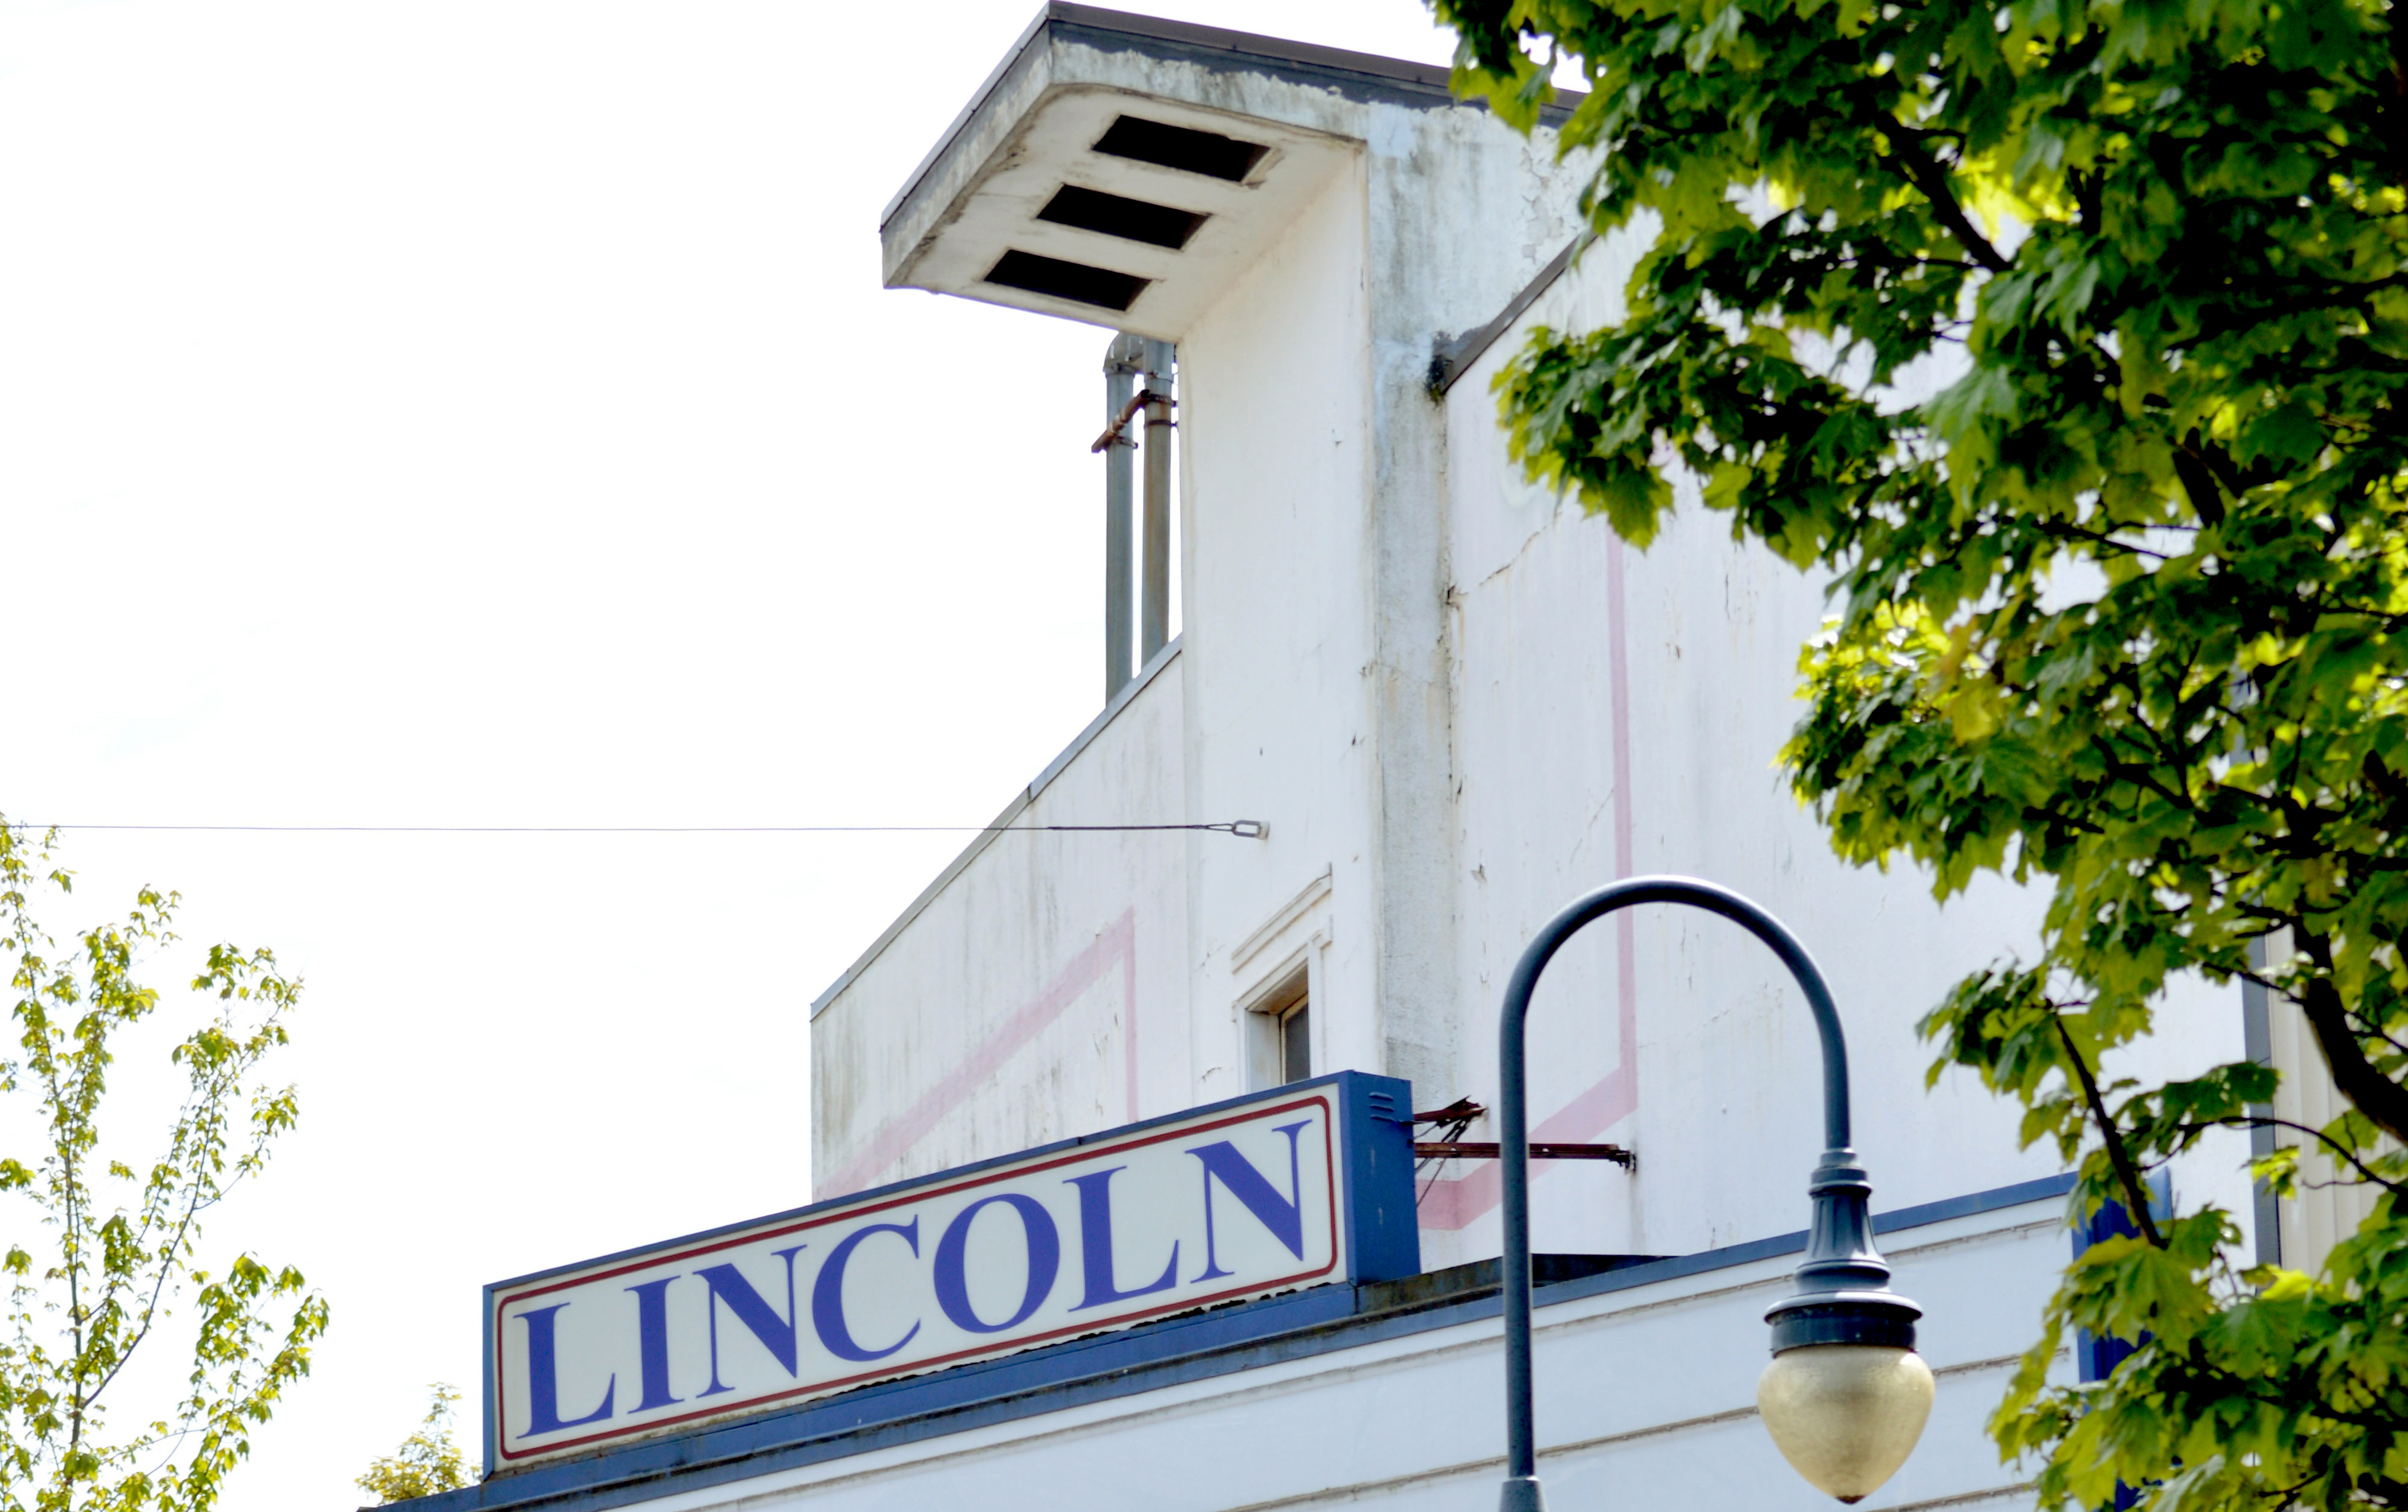 CORRECTED — Another save-Lincoln Theater forum Wednesday in Port Angeles